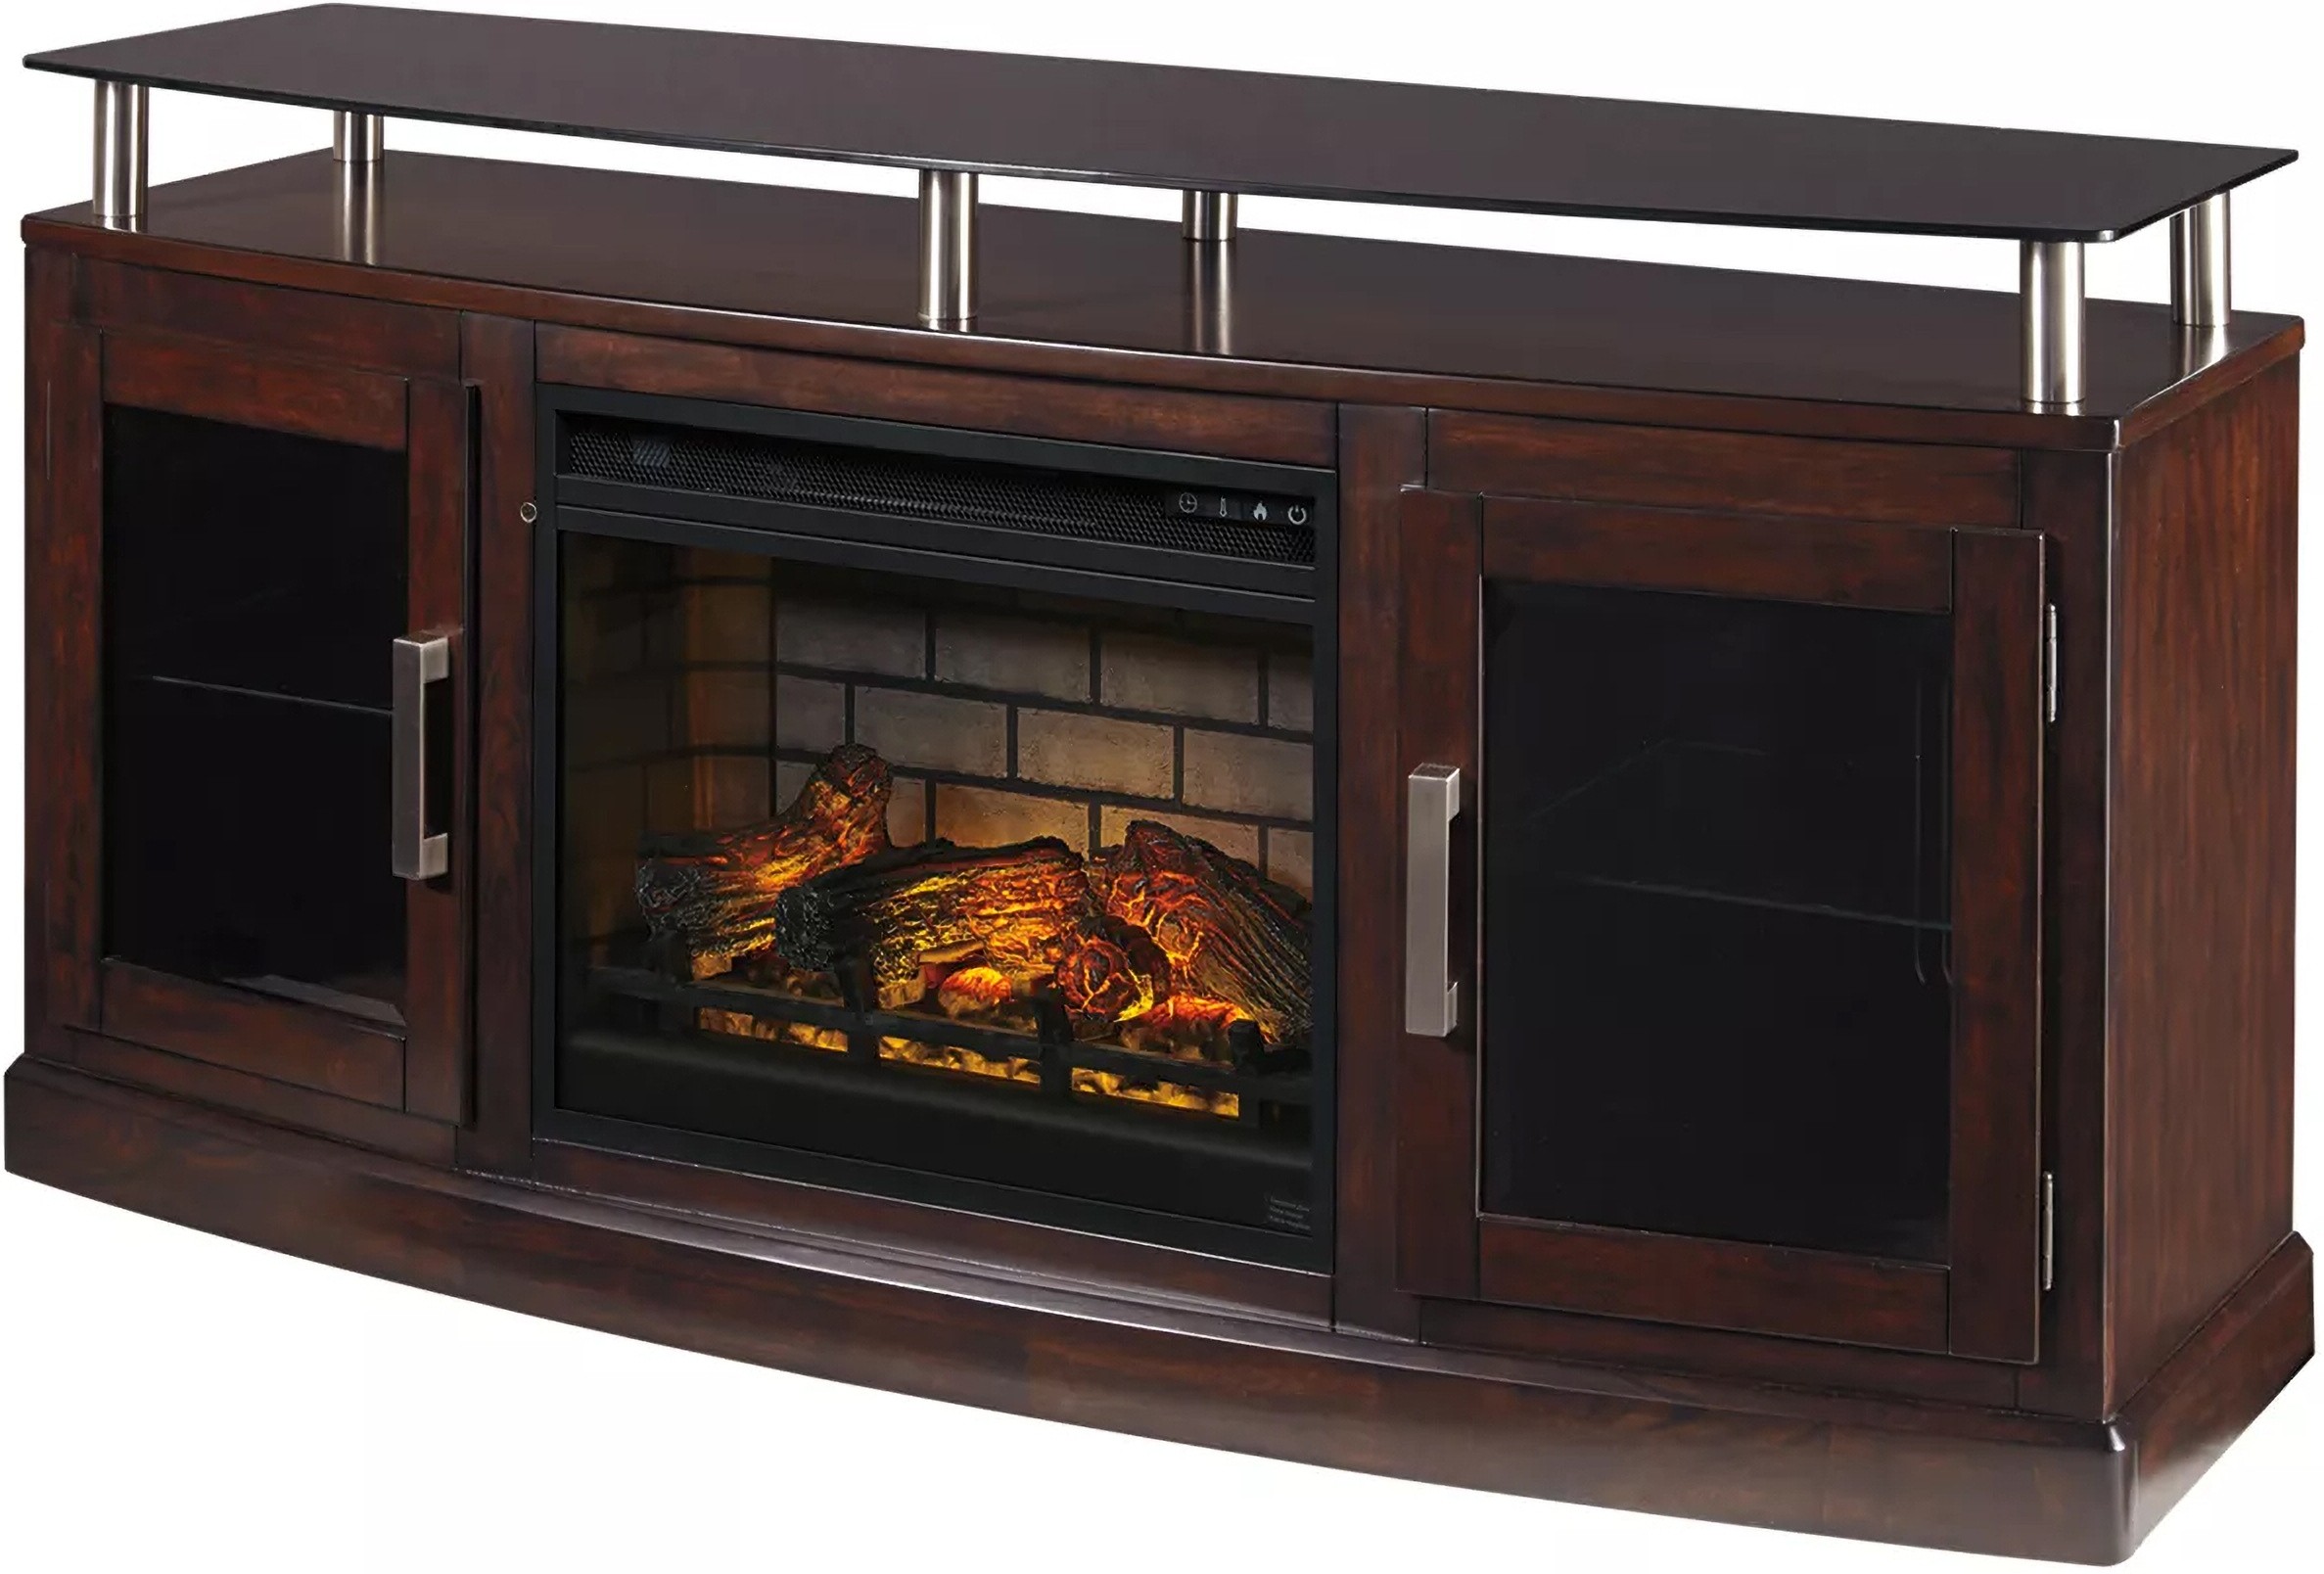 Chanceen Dark Brown 60" TV Stand with Electric Fireplace ...